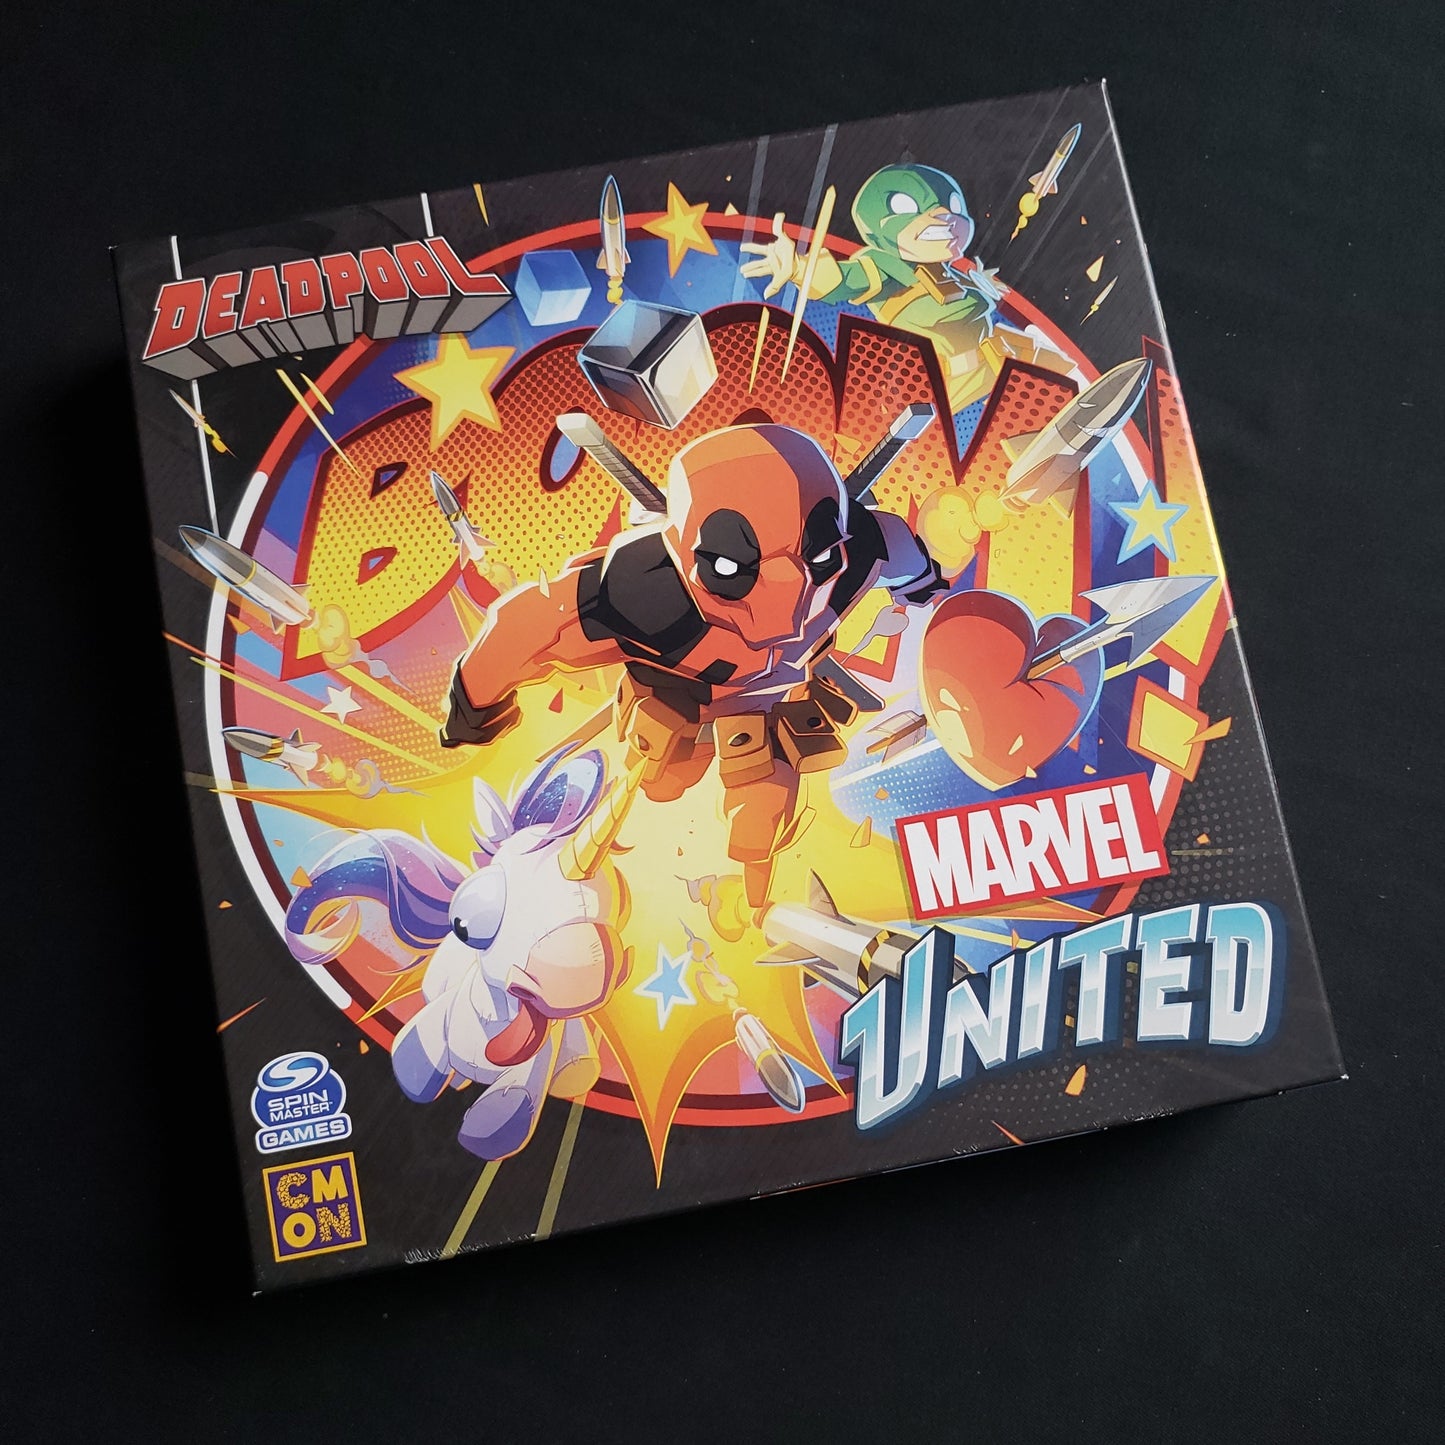 Image shows the front cover of the box of the Deadpool Expansion for the board game Marvel United